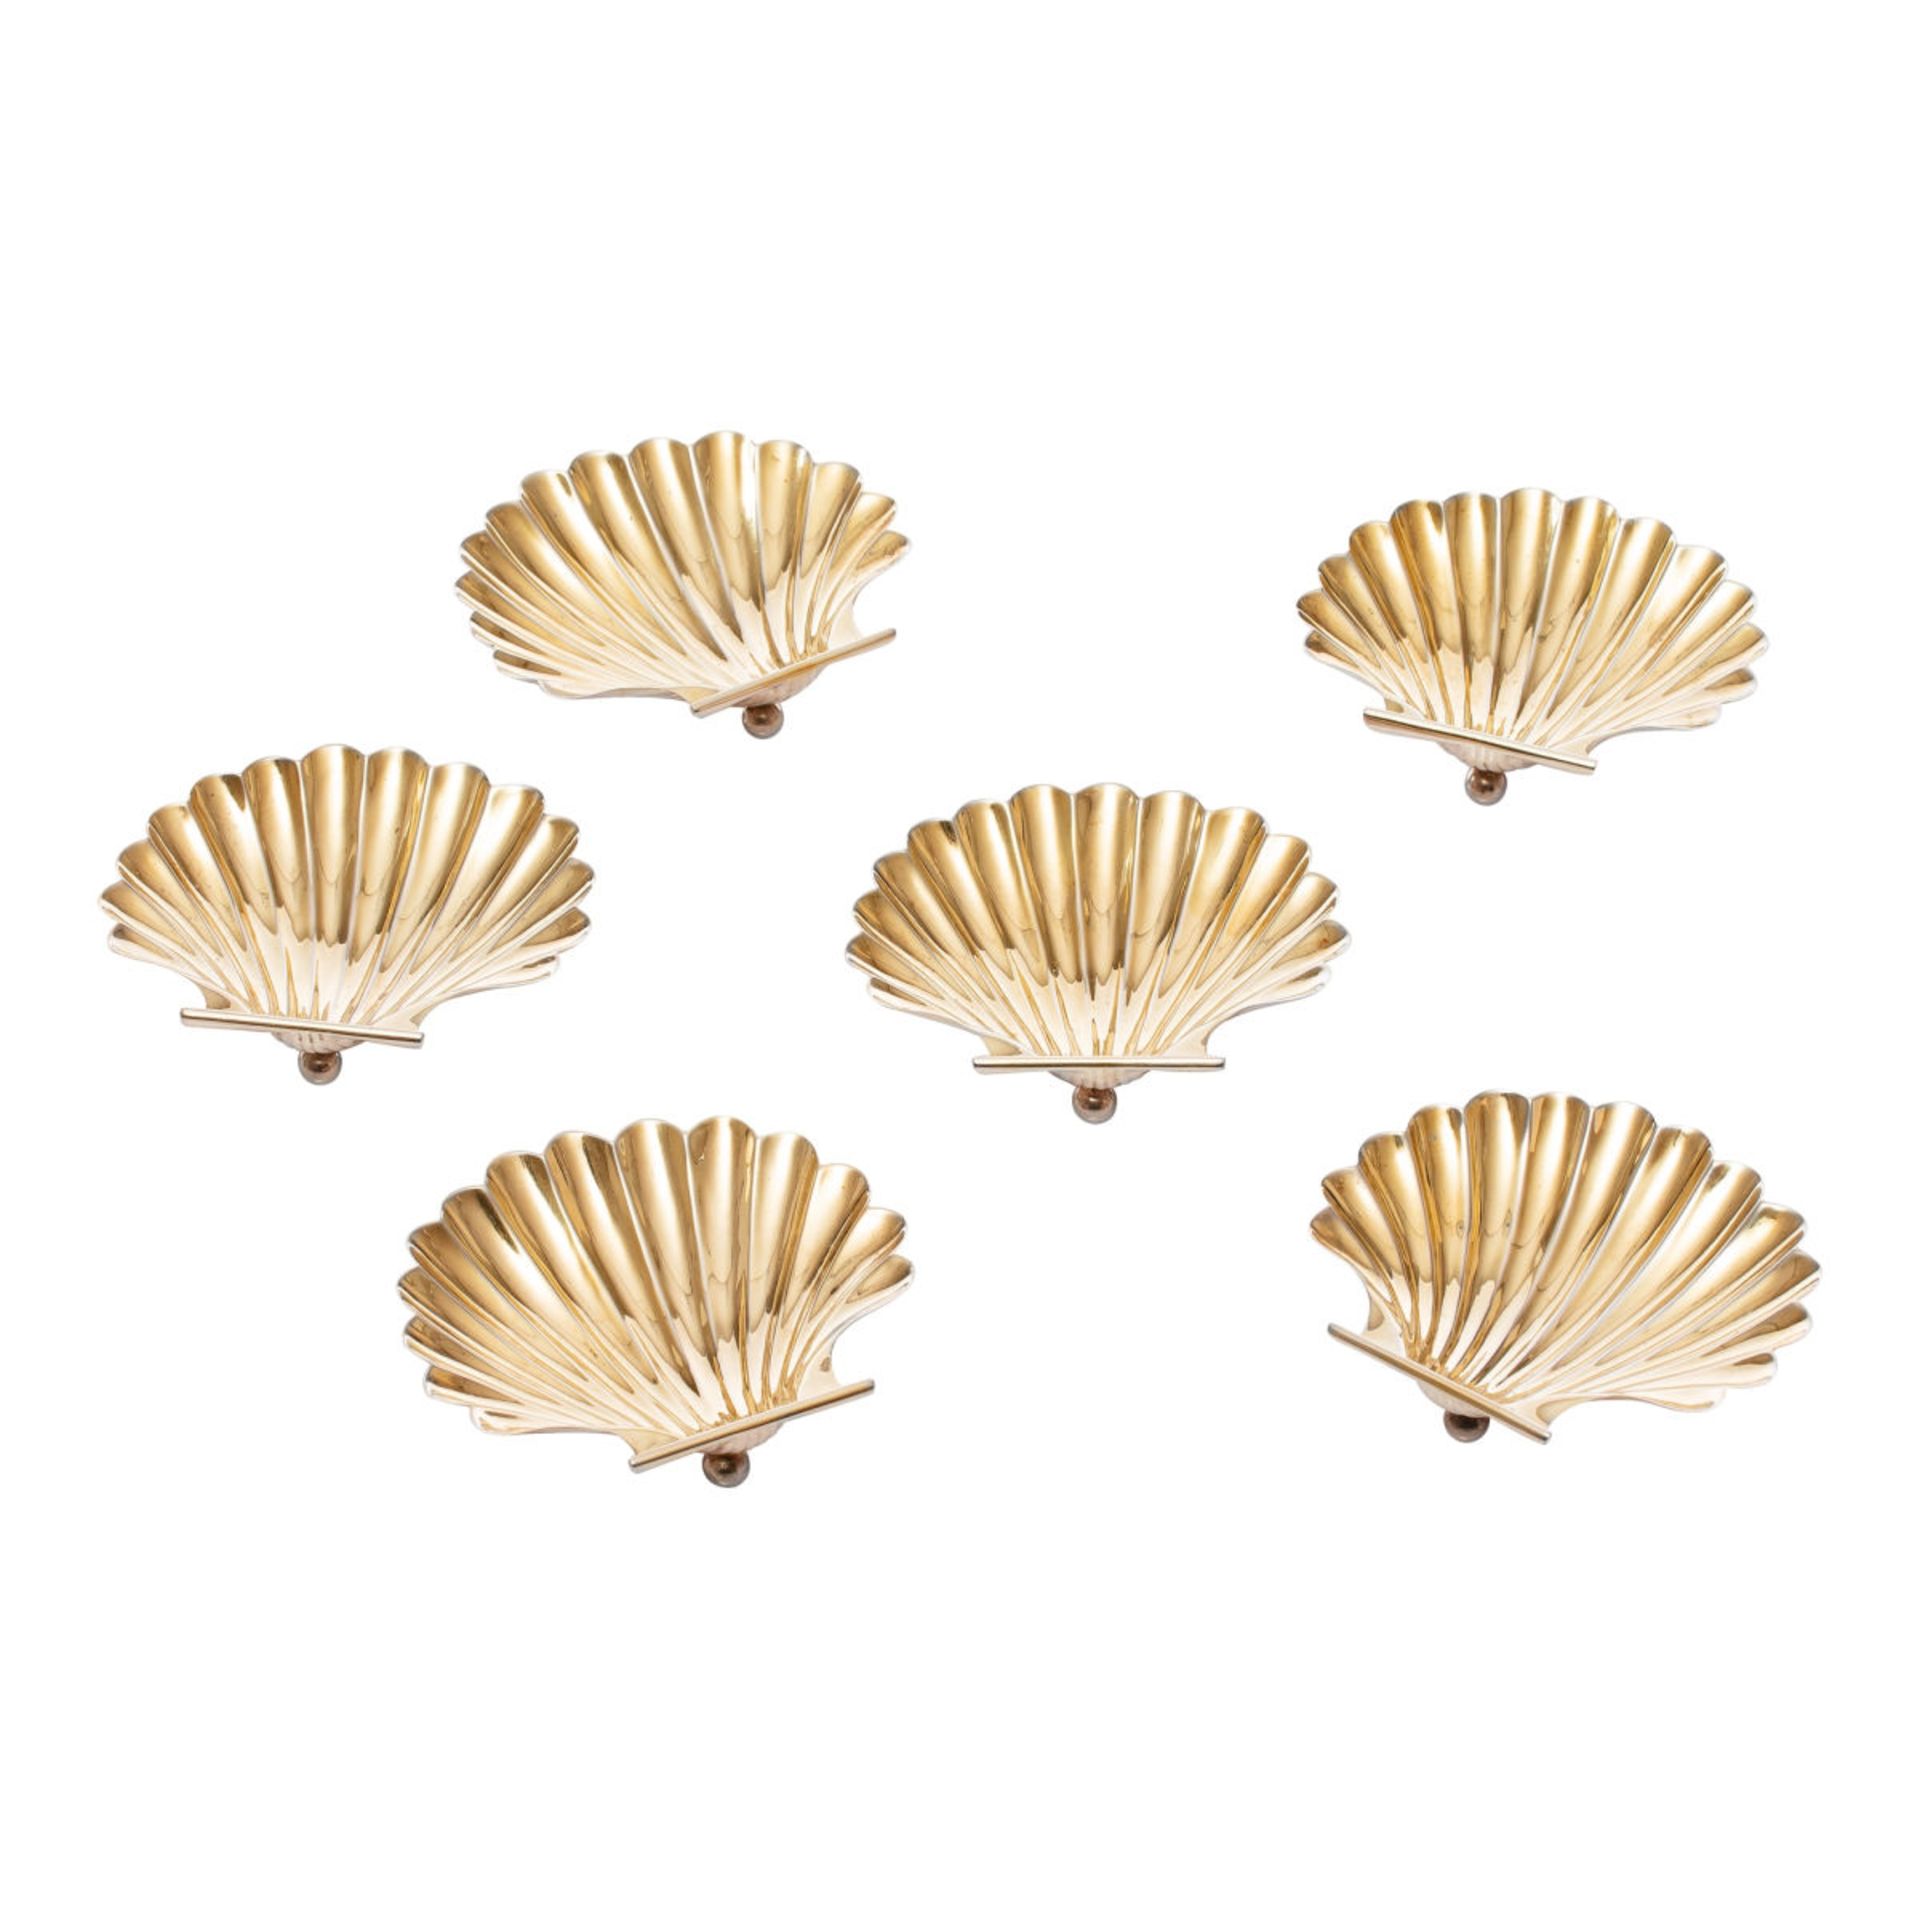 Cartier set of six shell dishes - Image 3 of 6